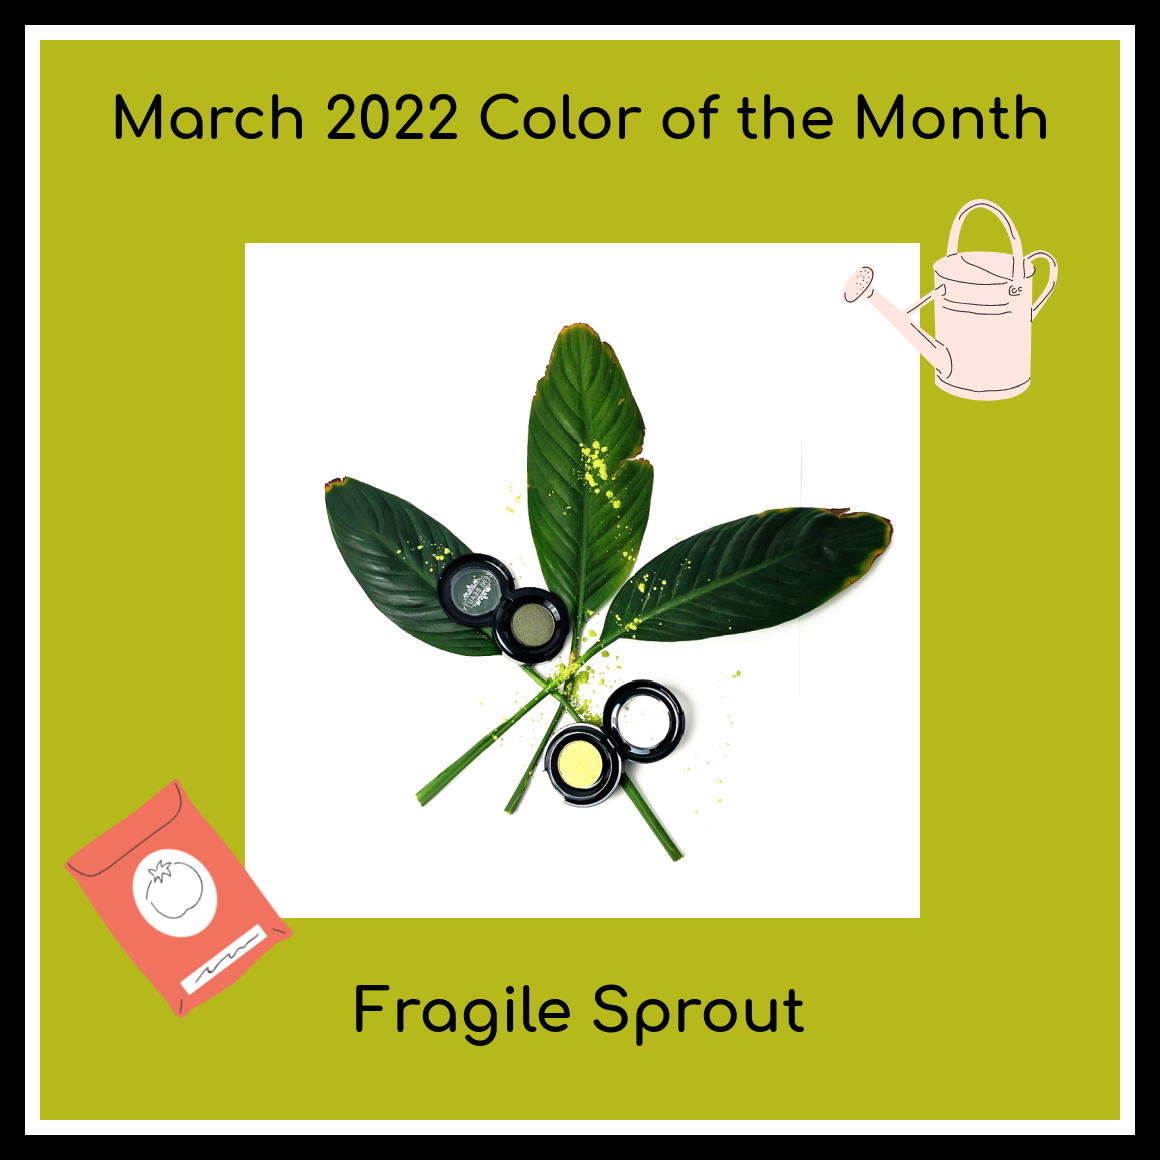 March 2022 Color of the Month is Fragile Sprout